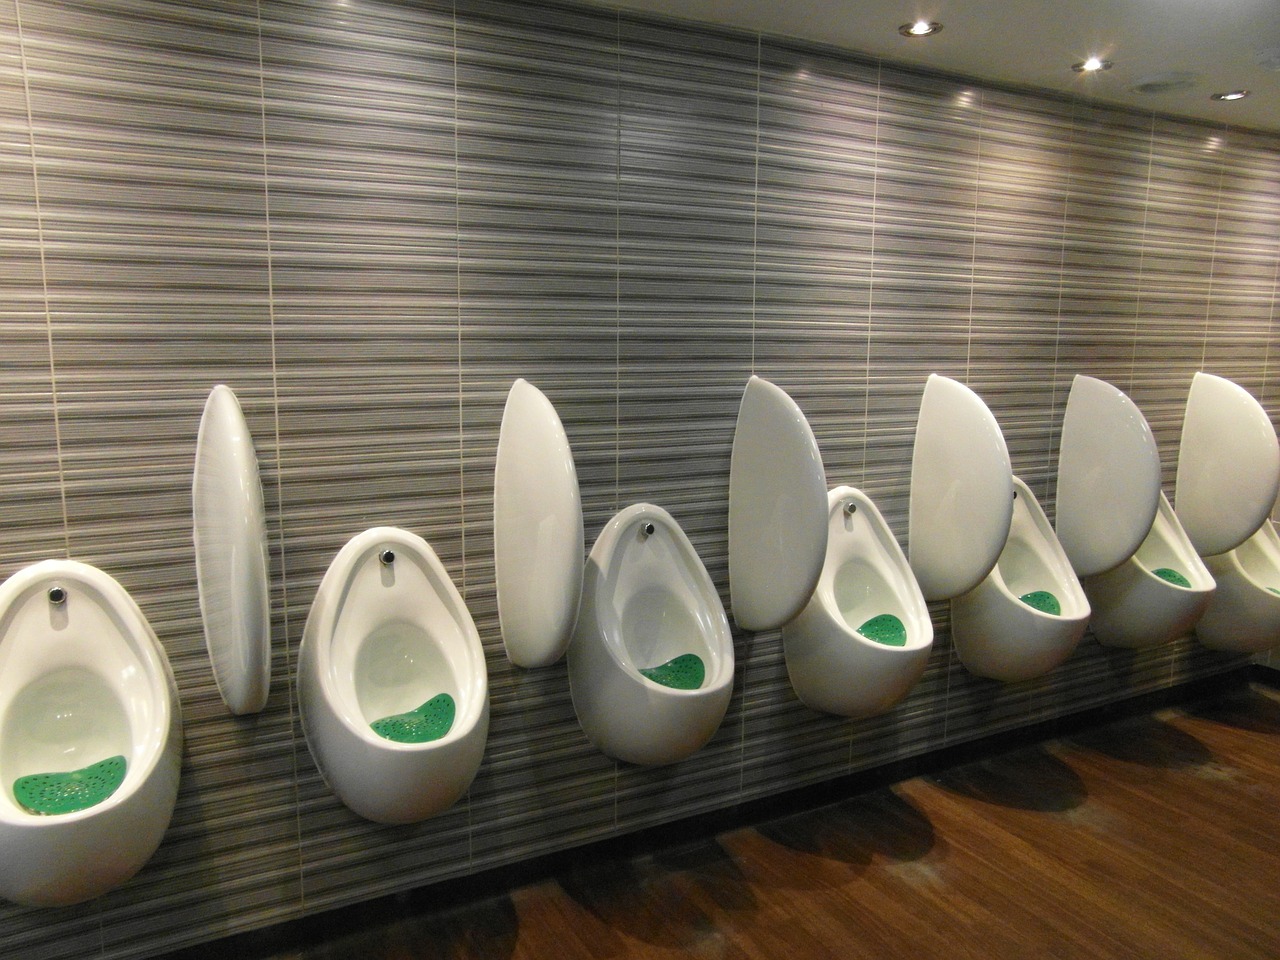 Restroom sanitation is important to any business to reduce sick days and improve productivity.